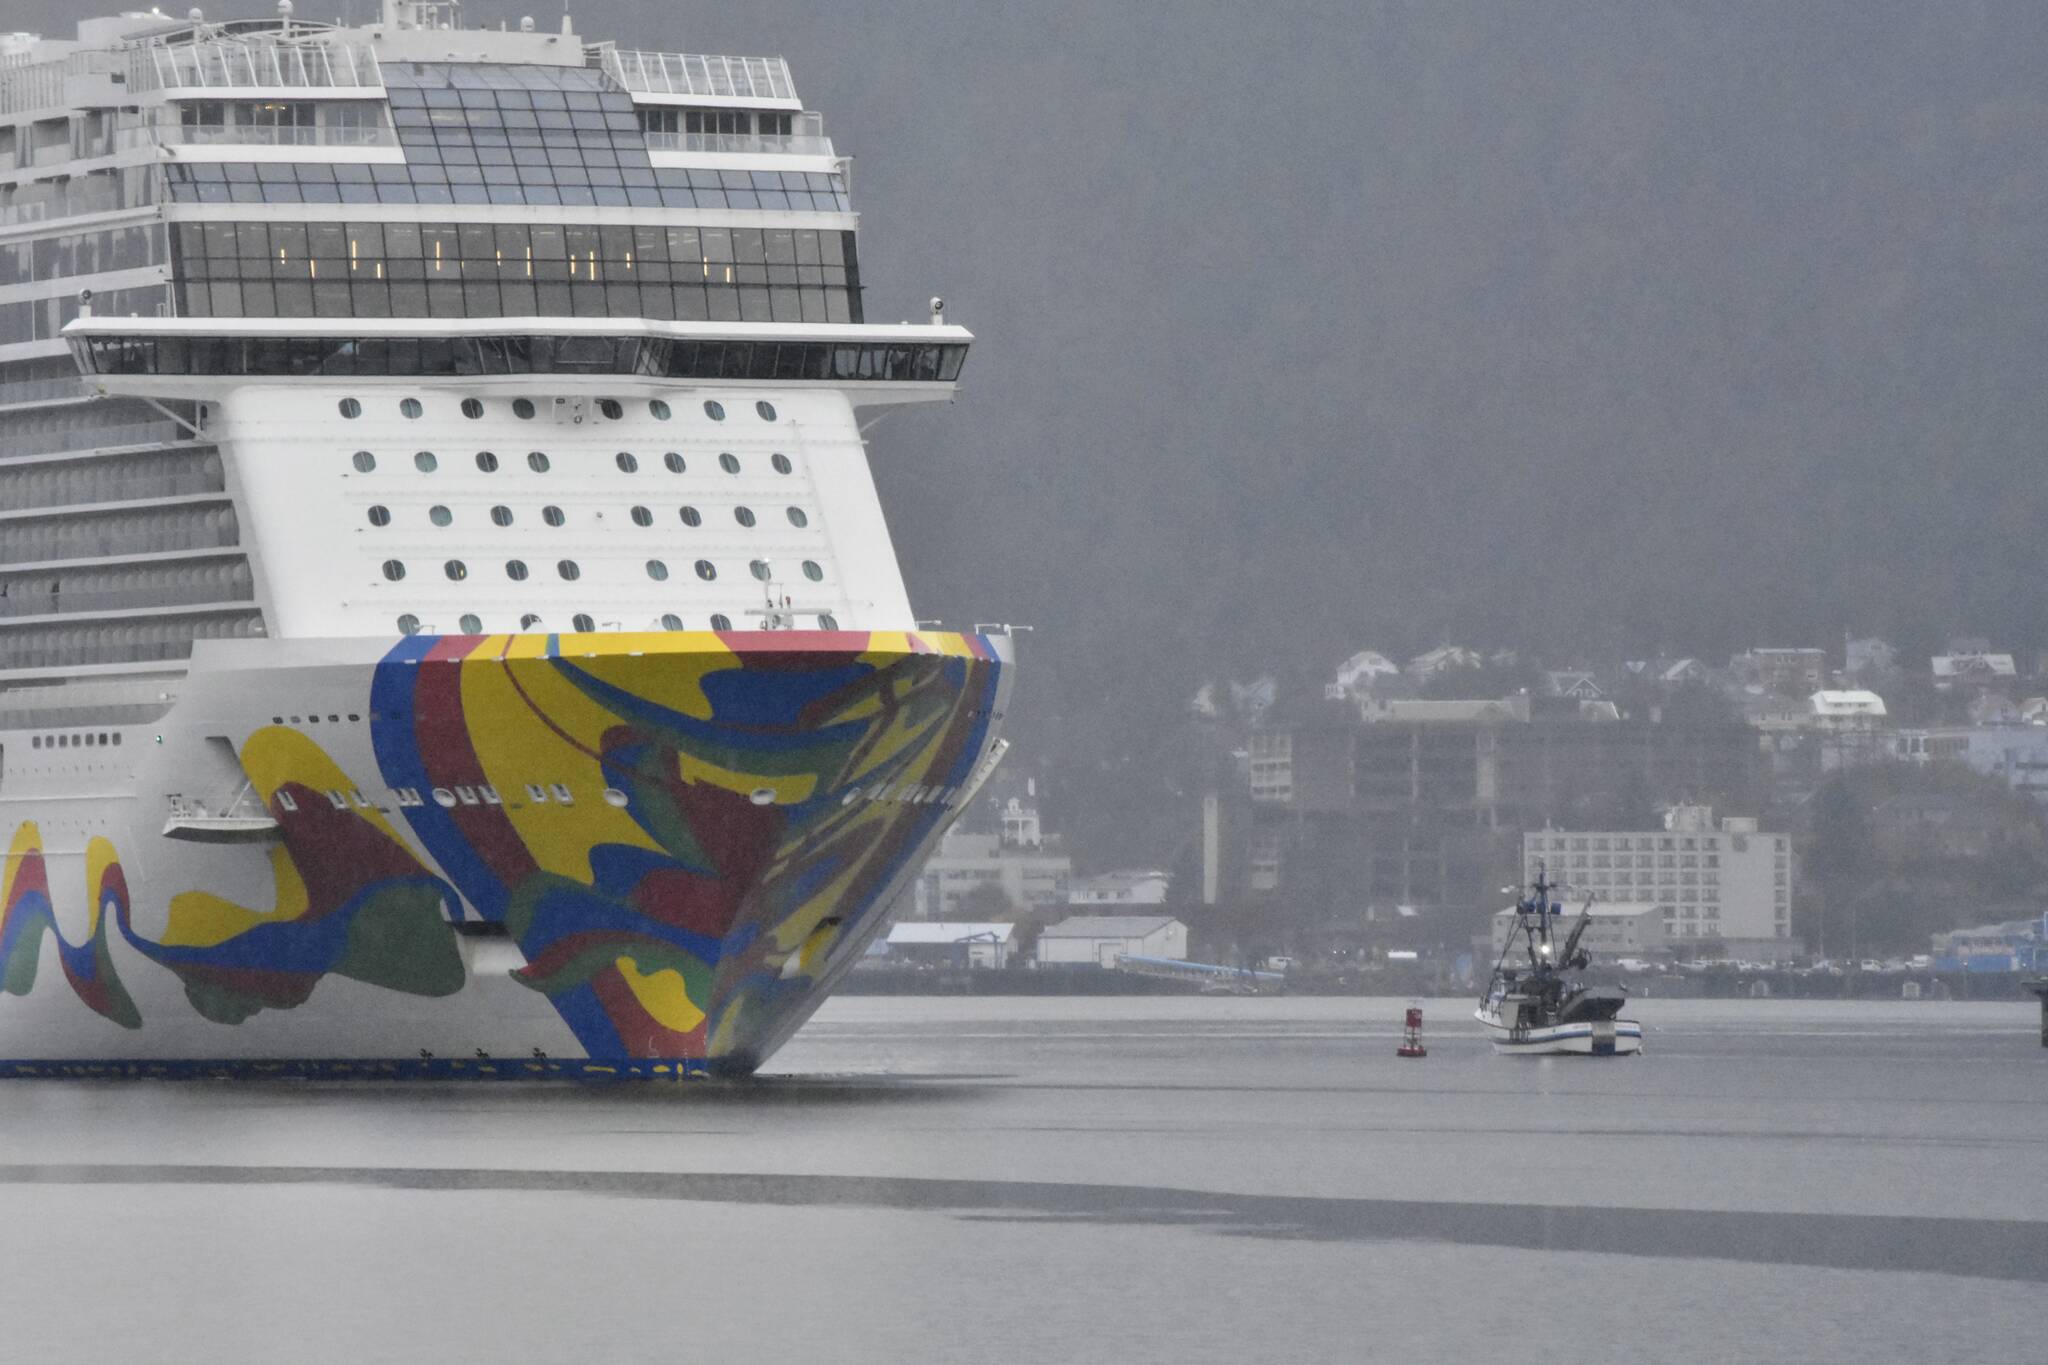 The last cruise ship of the year, the Norwegian Encore, sails out of Juneau on Wednesday, Oct., 20, 2021, ending a cruise ship season that almost didn’t happen. Despite other warnings lifting, Canadians are still advised to avoid cruise ship travel. (Peter Segall / Juneau Empire)